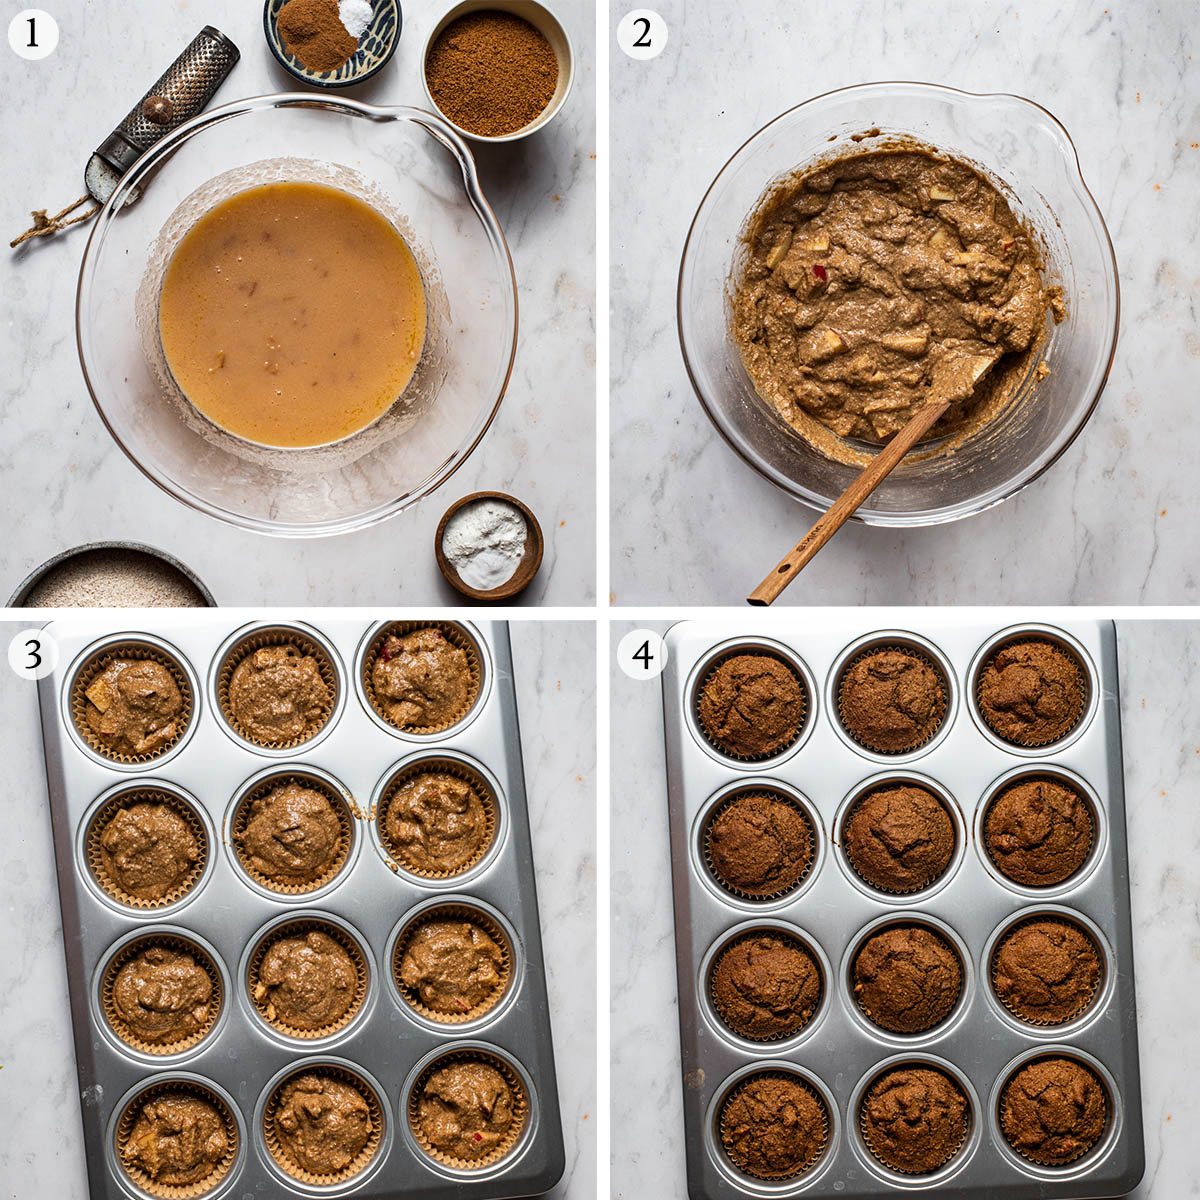 Apple muffins steps 1 to 4.